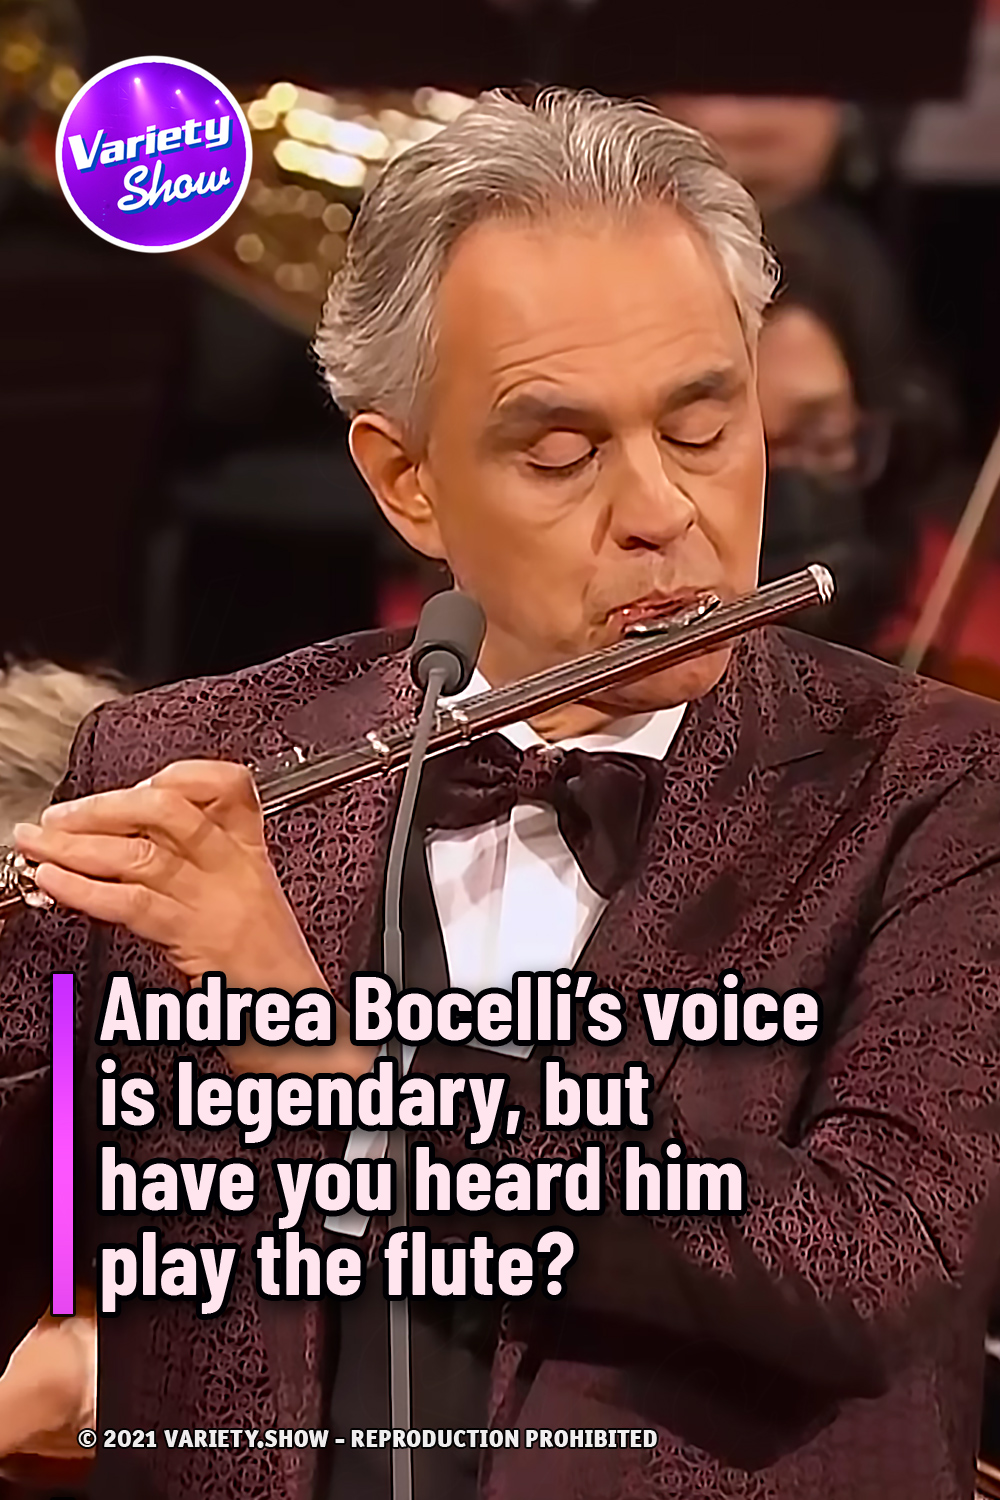 Andrea Bocelli’s voice is legendary, but have you heard him play the flute?